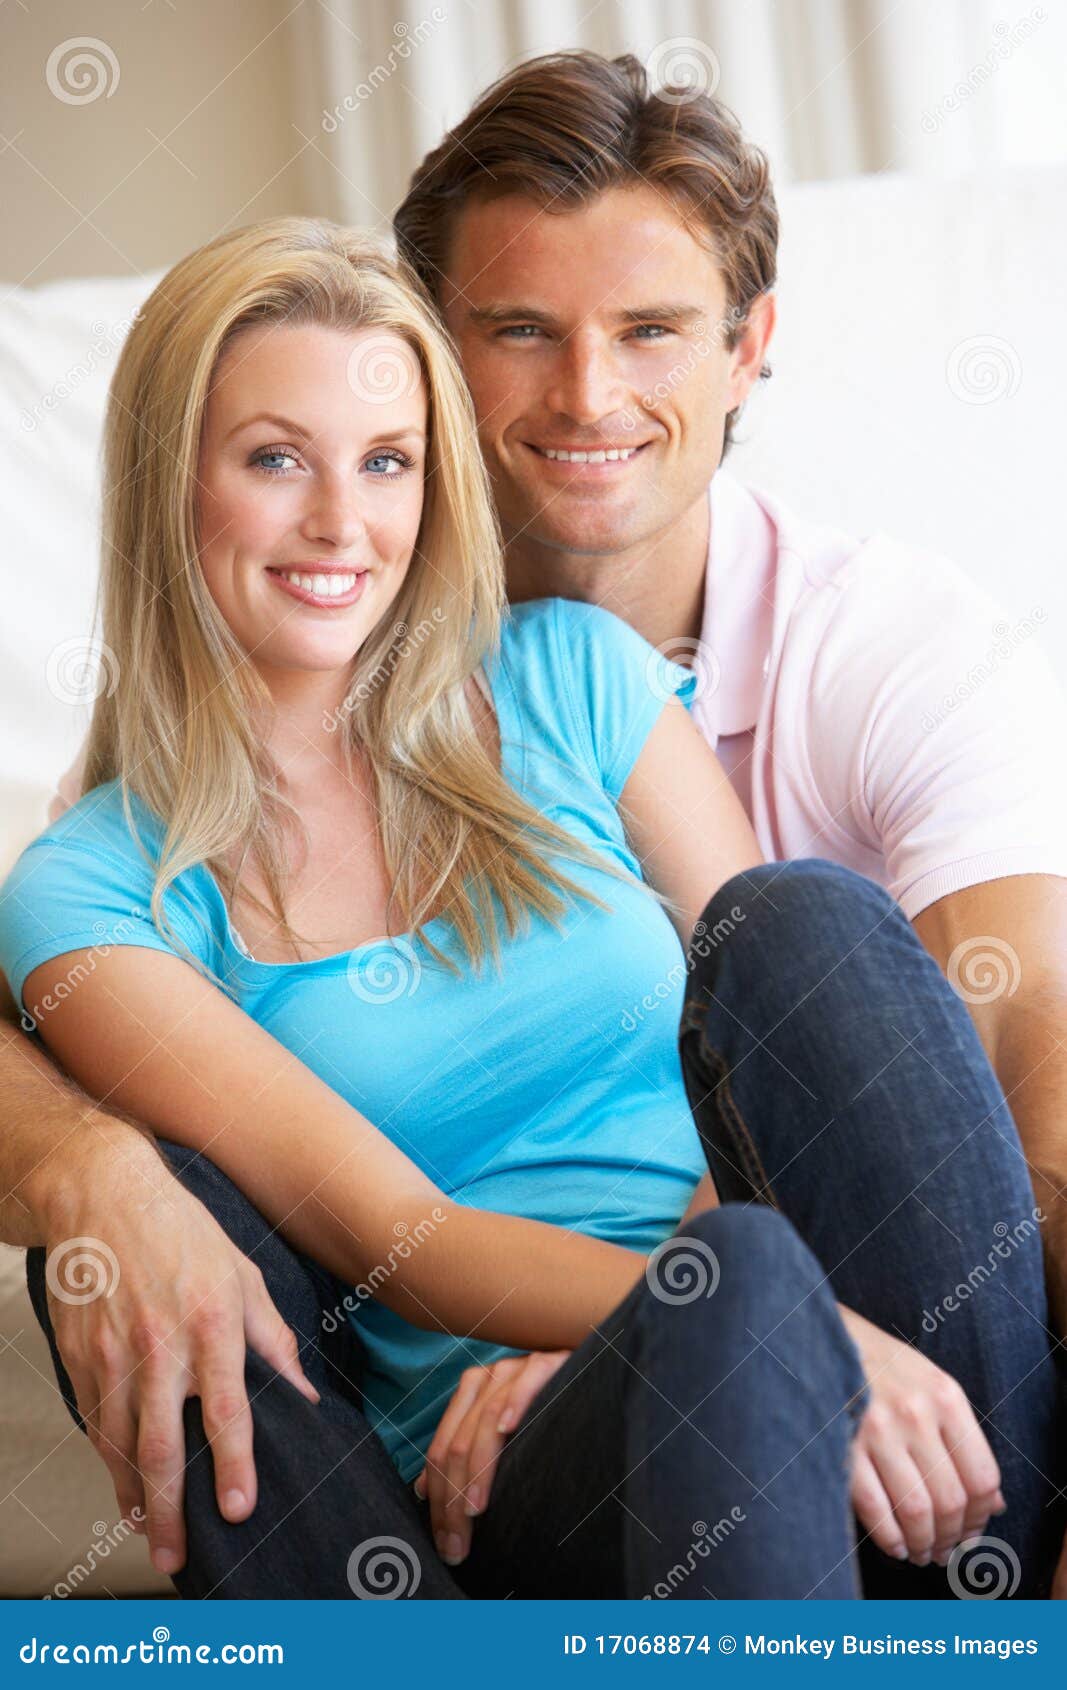 young couple posing indoors